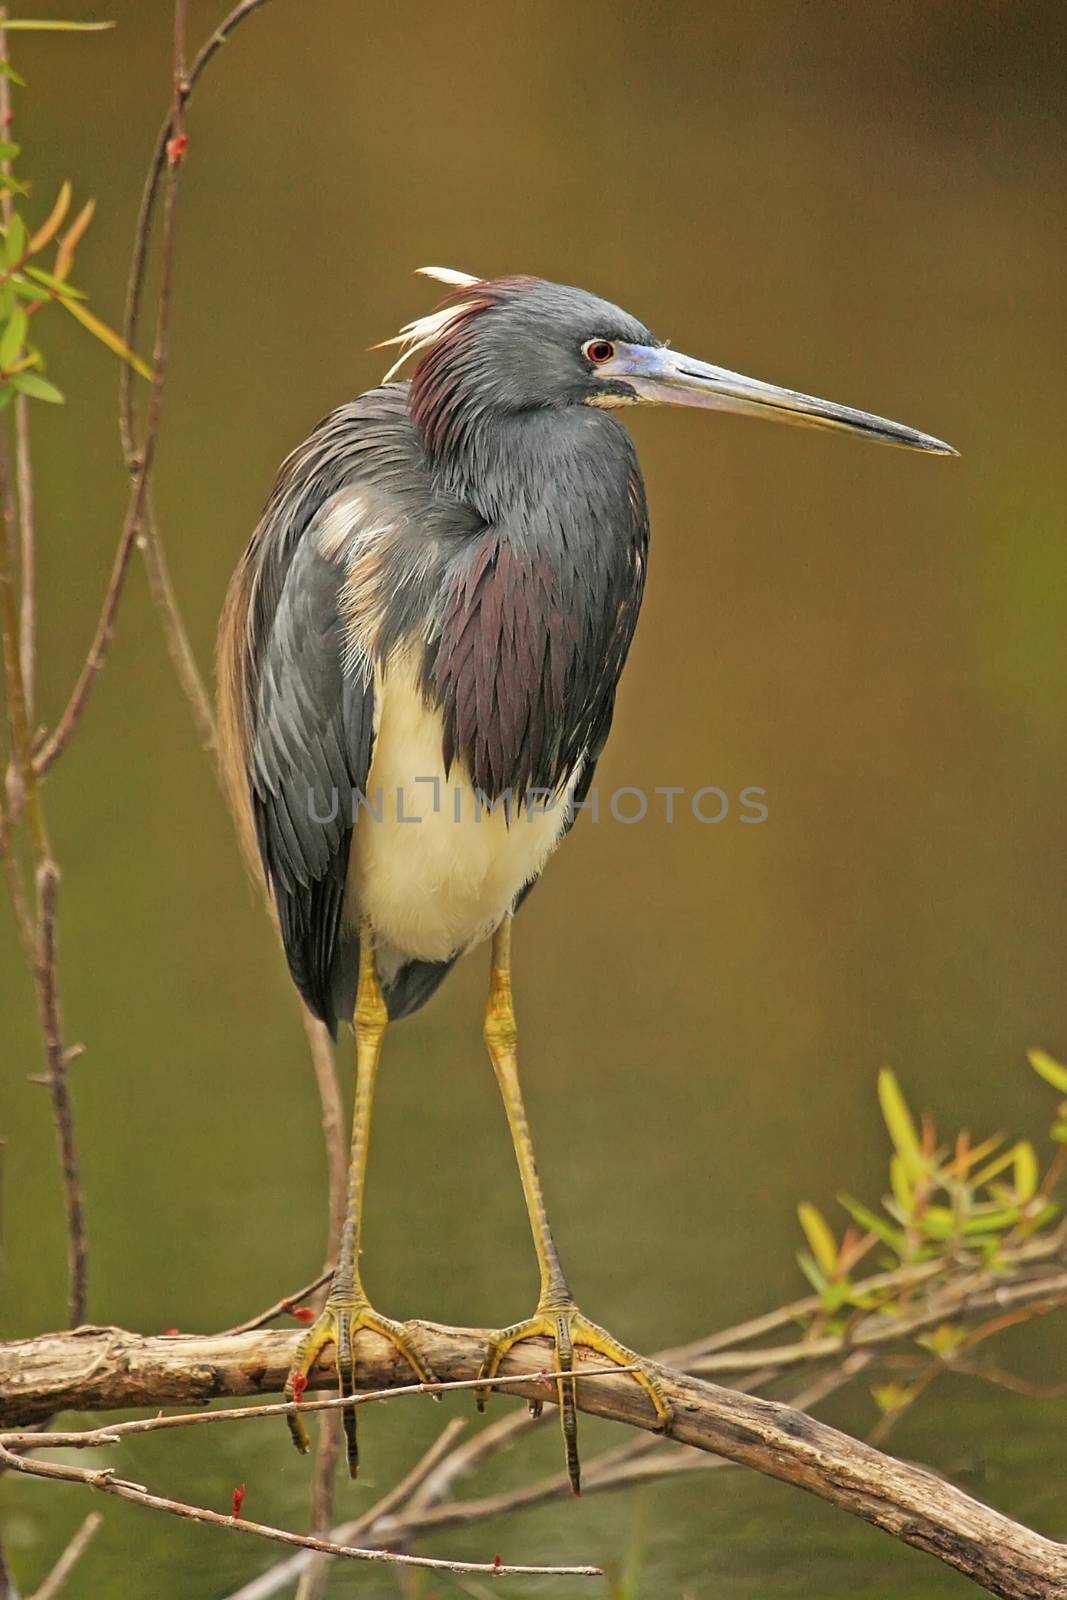 Tricolored Heron (Egretta tricolor) by donya_nedomam